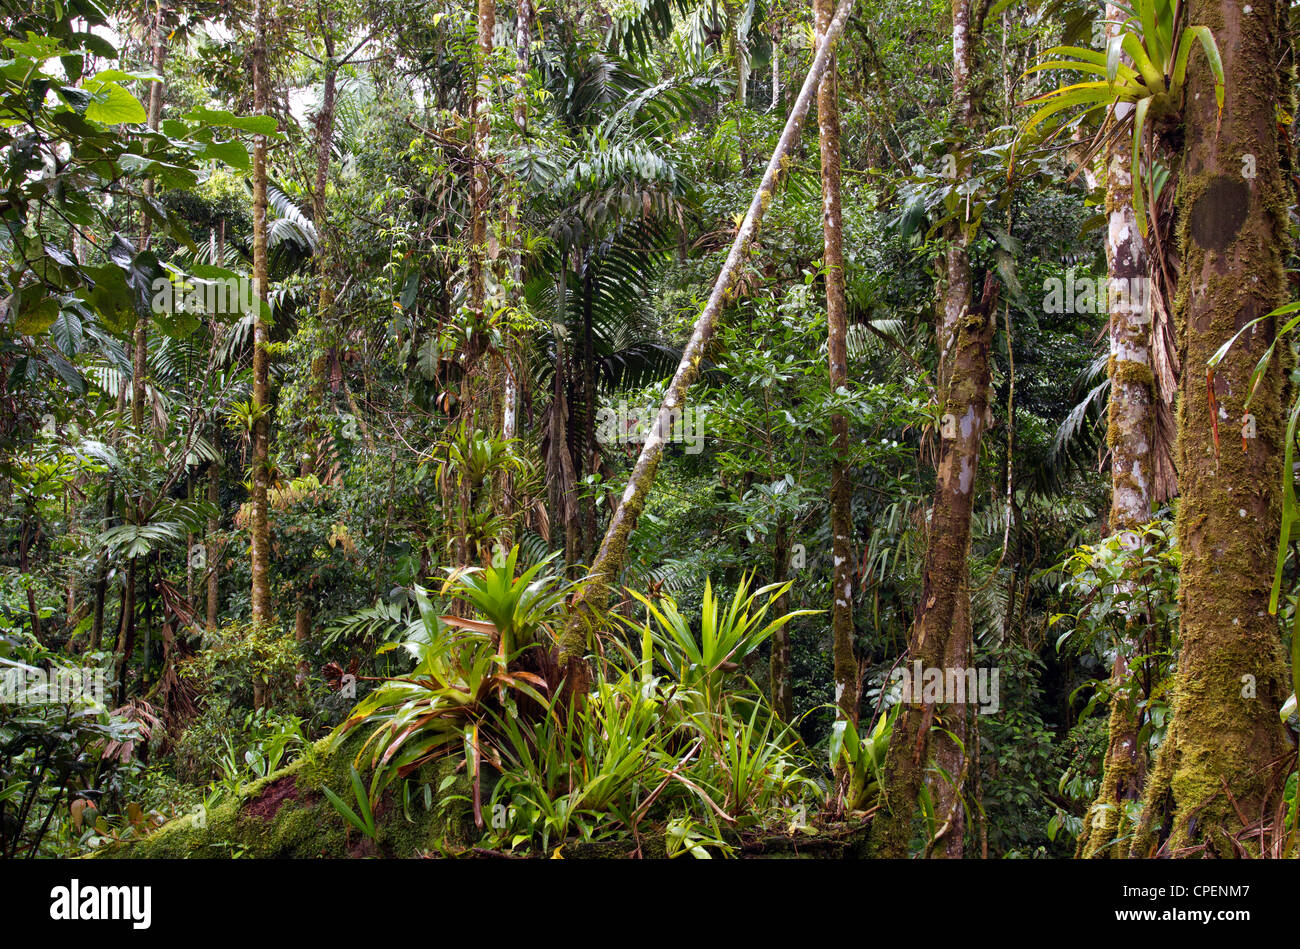 Amazonian rainforest in Ecuador with many bromeliads in foreground Stock Photo